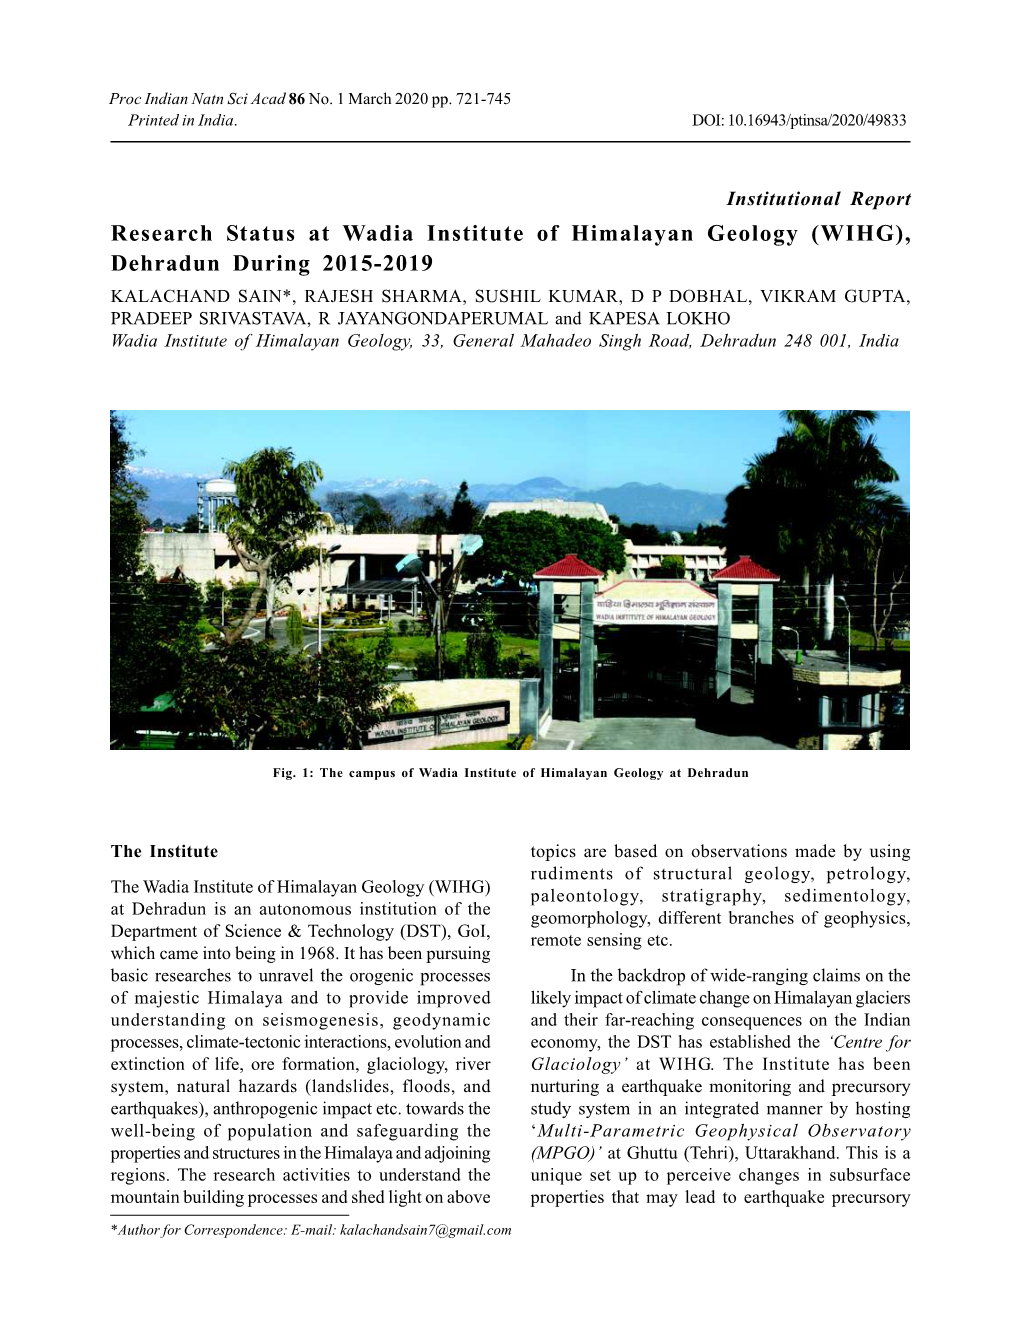 Research Status at Wadia Institute of Himalayan Geology (WIHG)